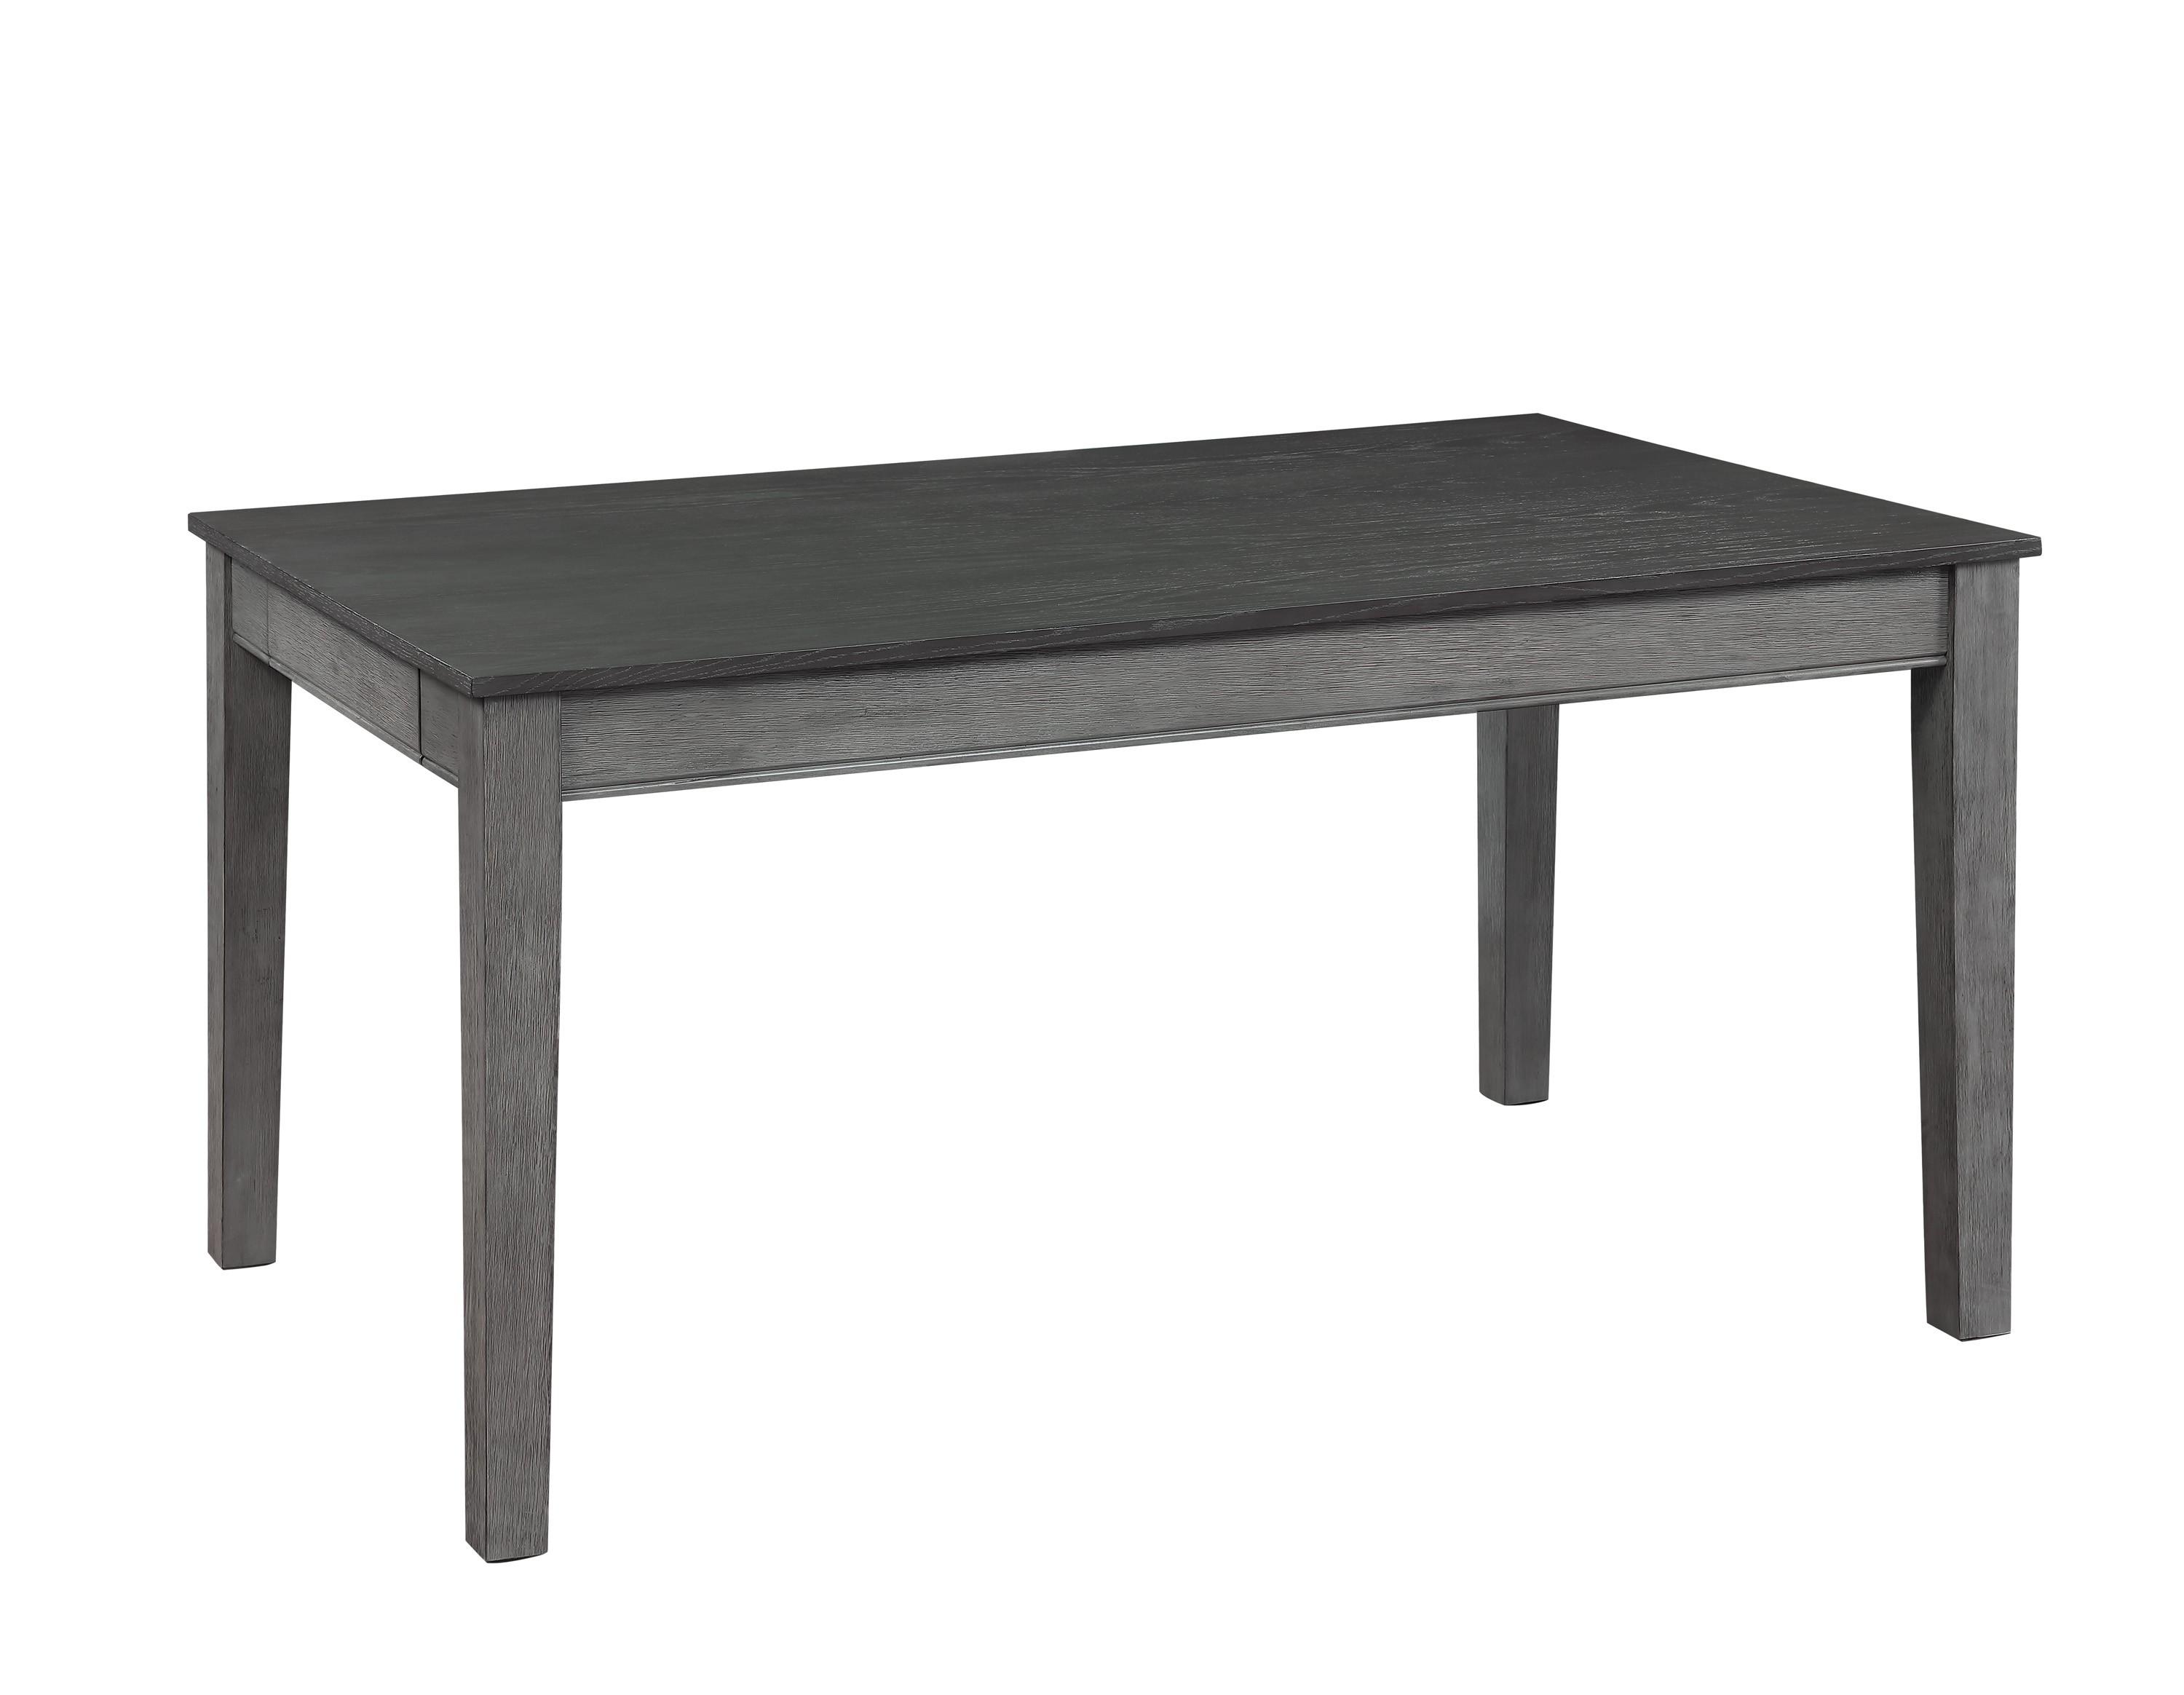 Transitional Dining Table 5706GY-60 Armhurst 5706GY-60 in Gray 